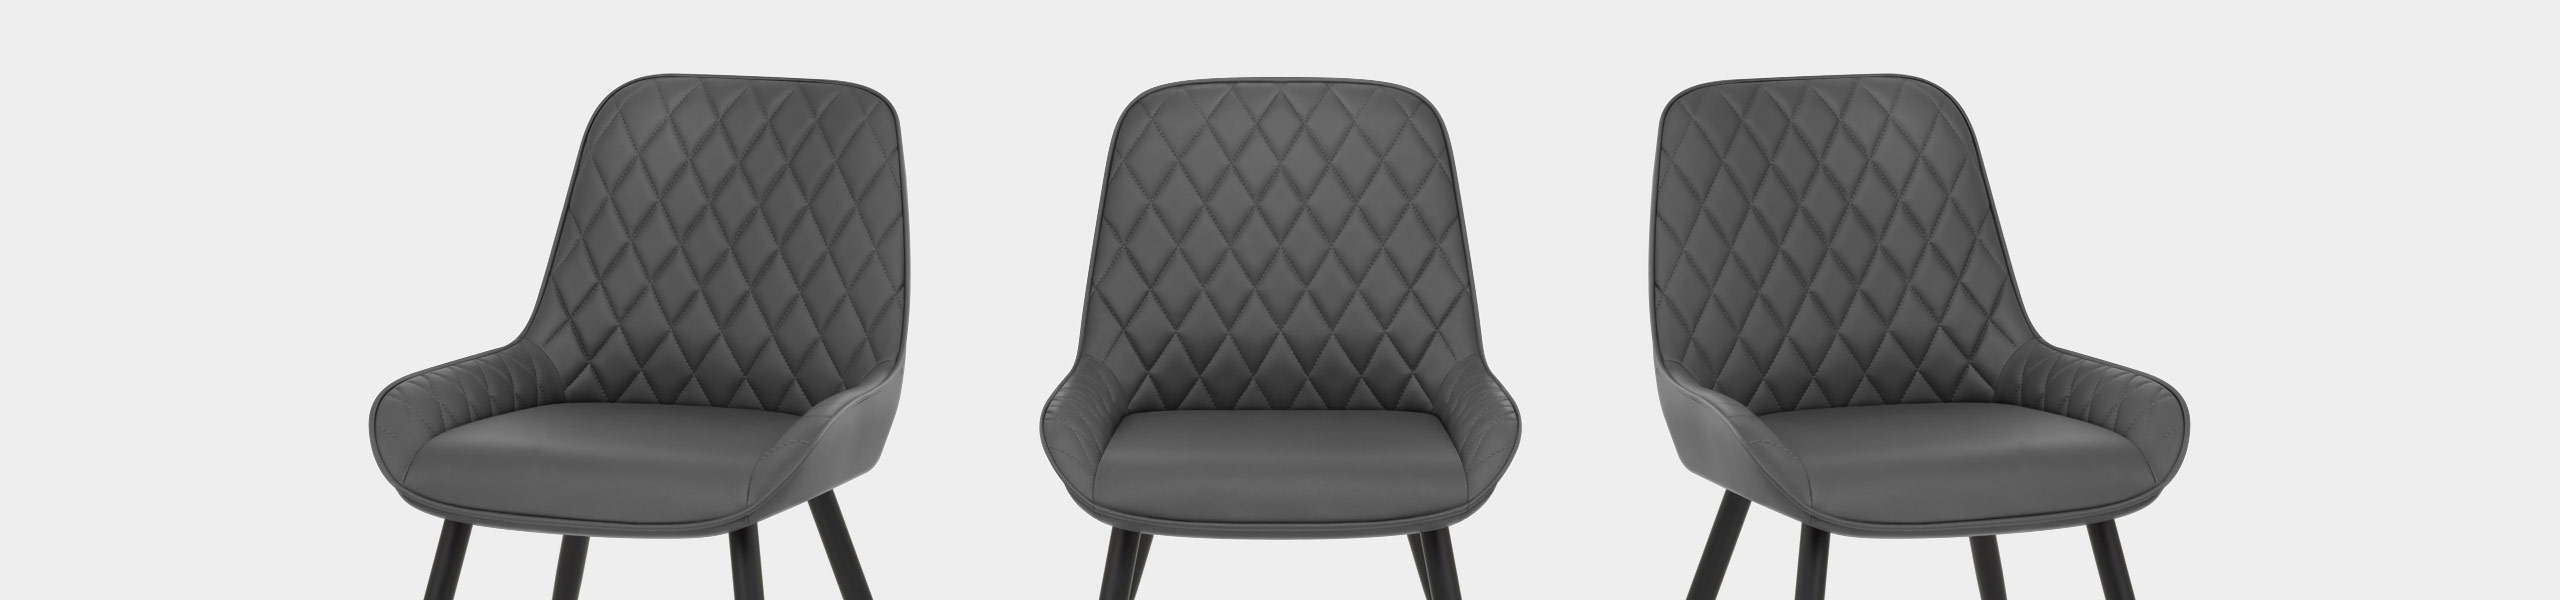 Lincoln Dining Chair Grey Video Banner